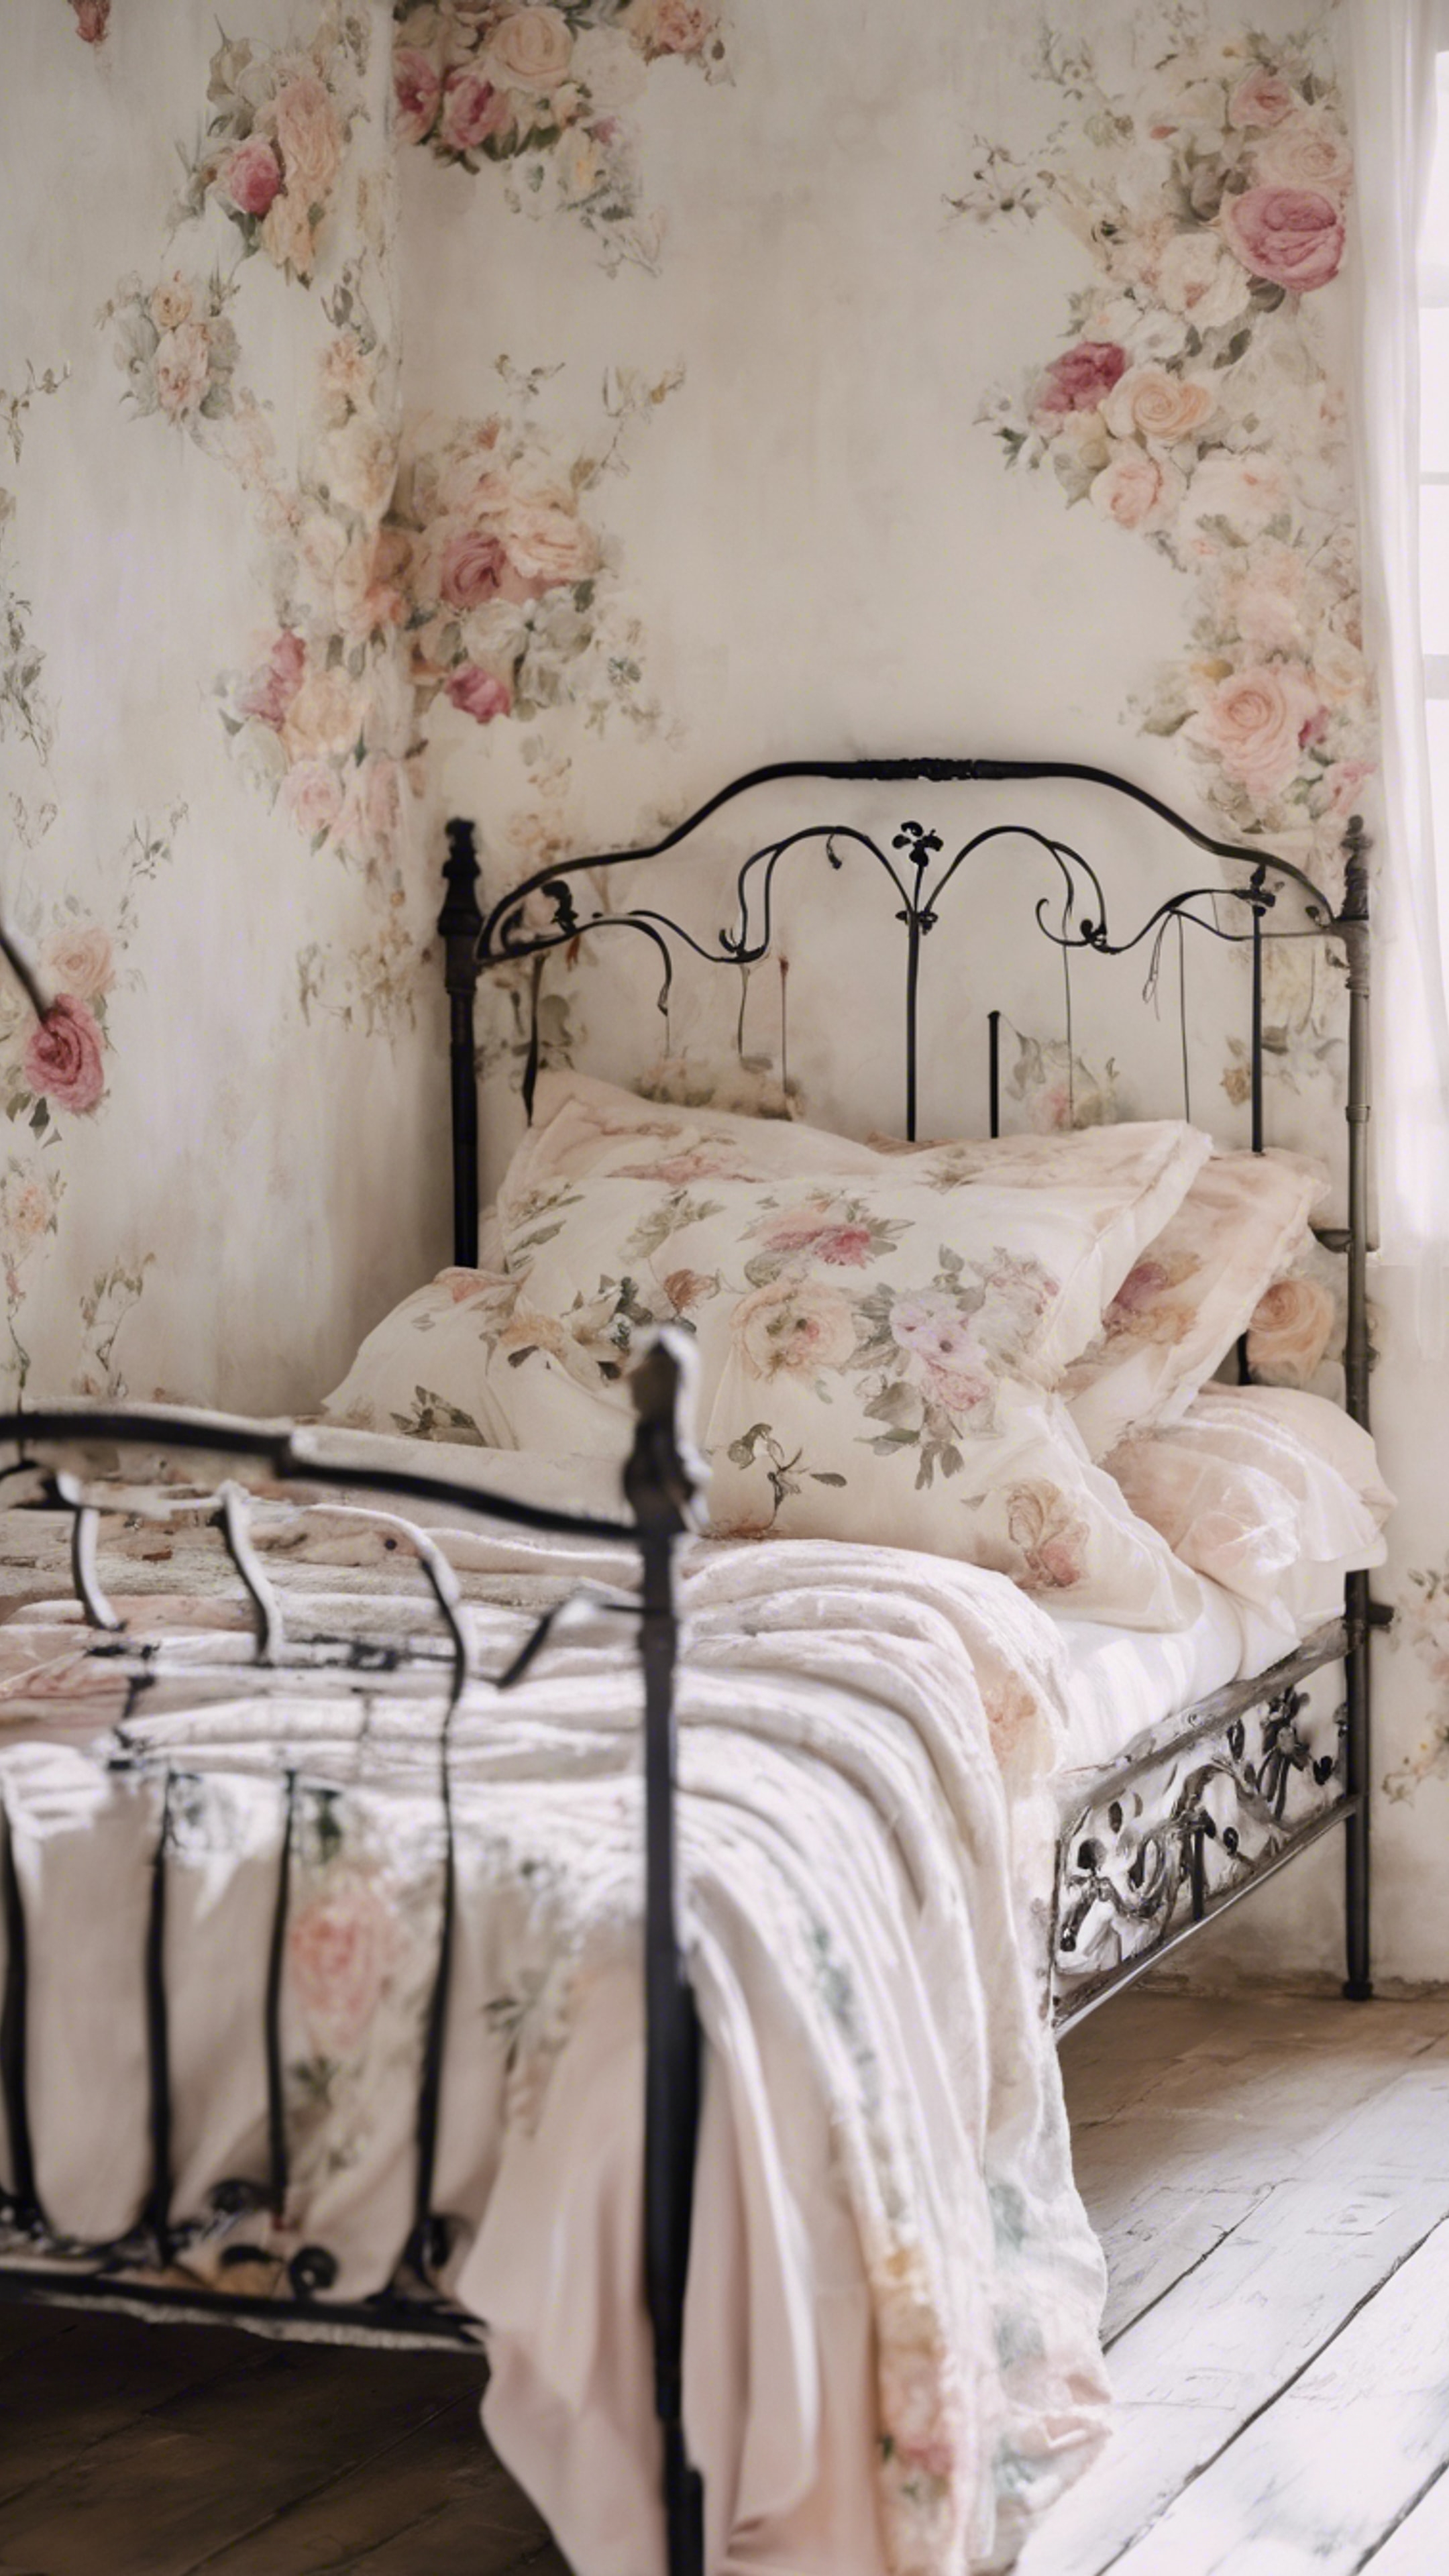 A French country bedroom featuring a wrought-iron bed and pastel floral patterns against whitewashed walls. วอลล์เปเปอร์[80b94b8799dc4ca6abc7]